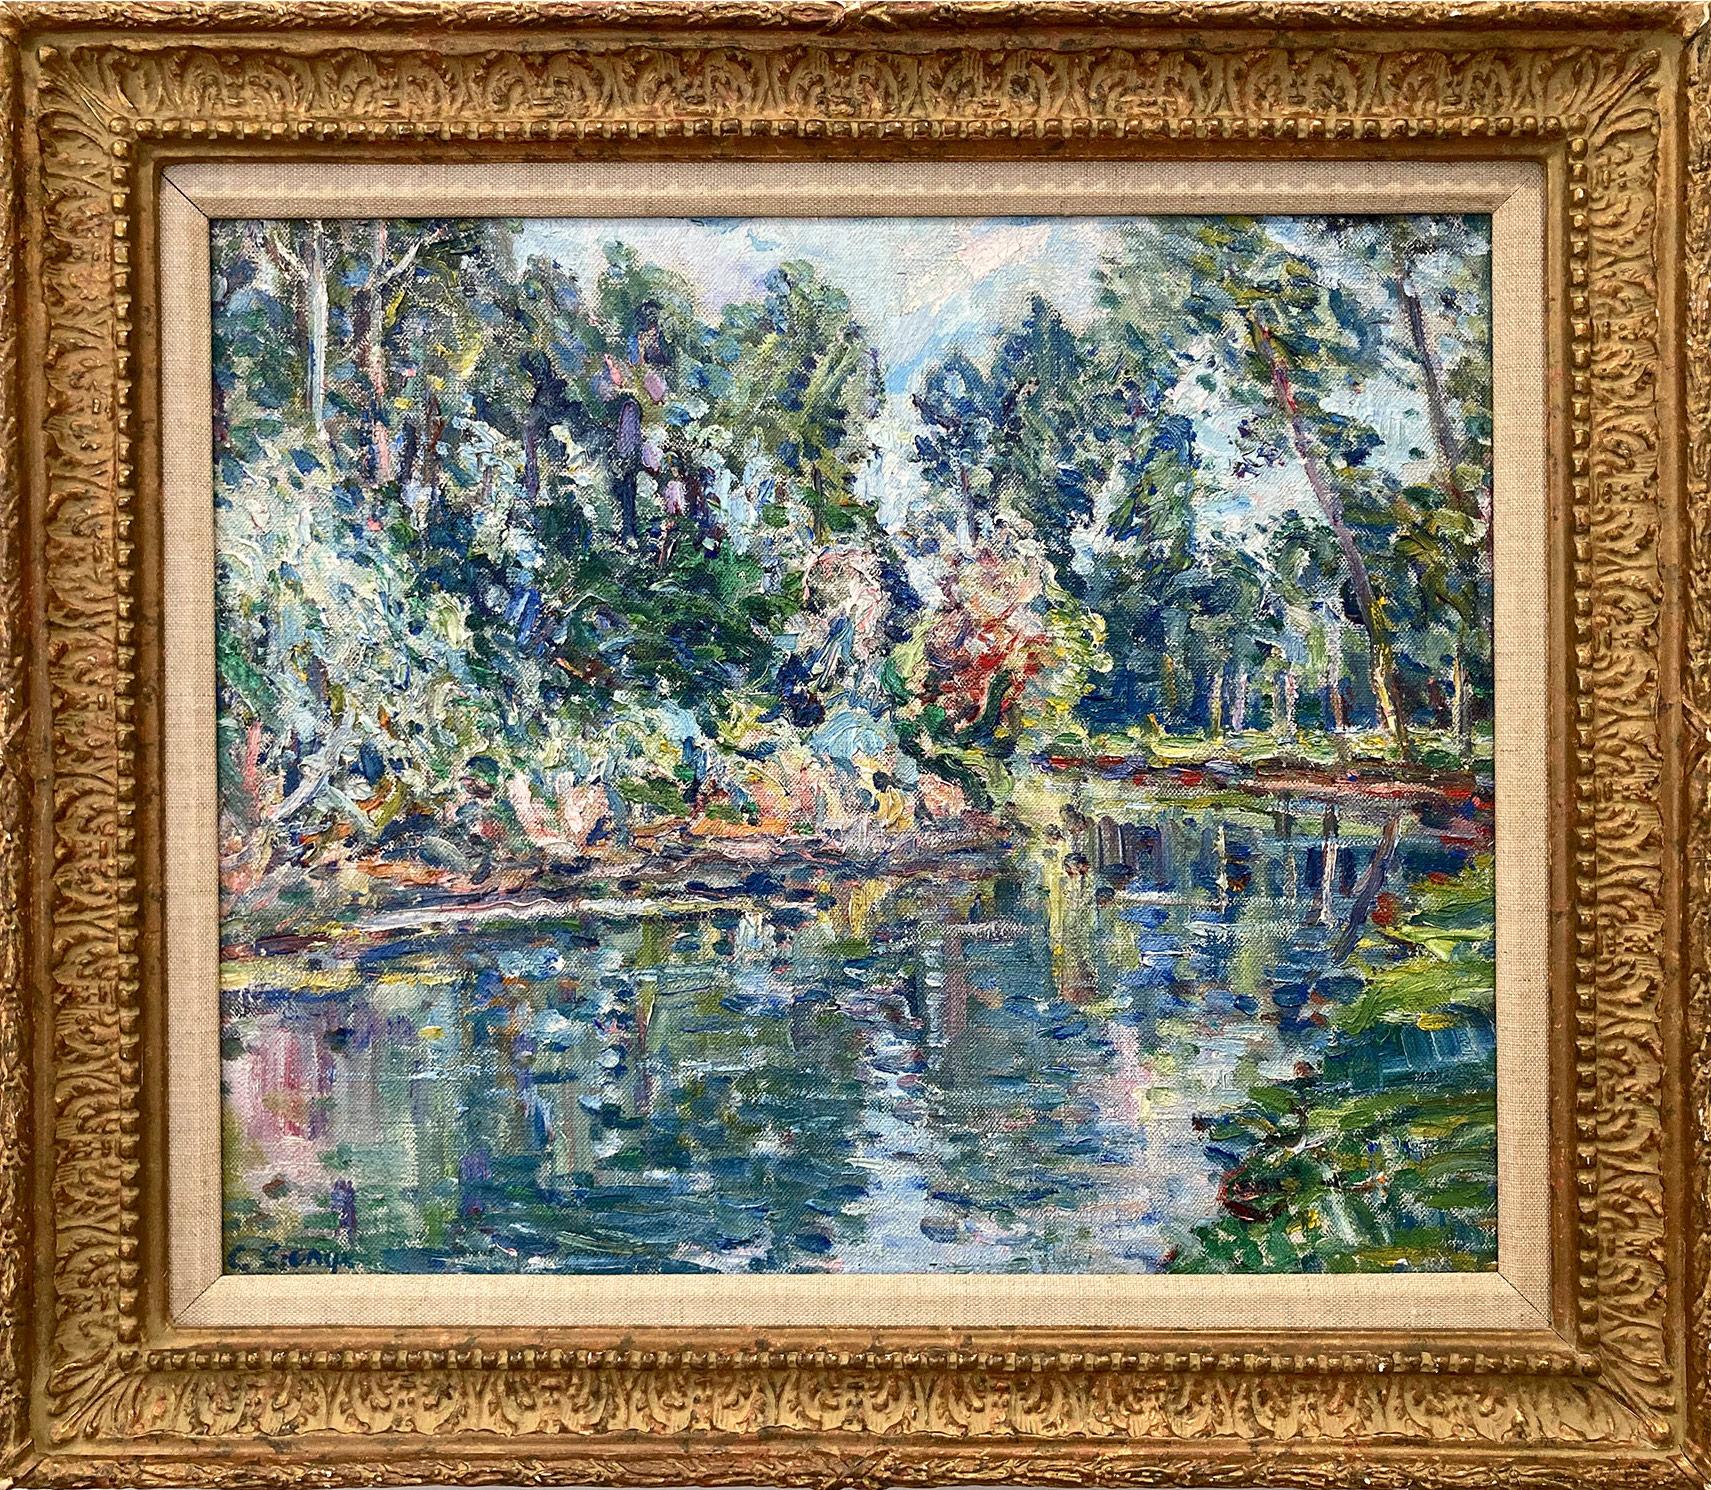 Charles E Genge Landscape Painting - "Bend on the River" Colorful 20th Century Impressionist Oil Painting on Canvas